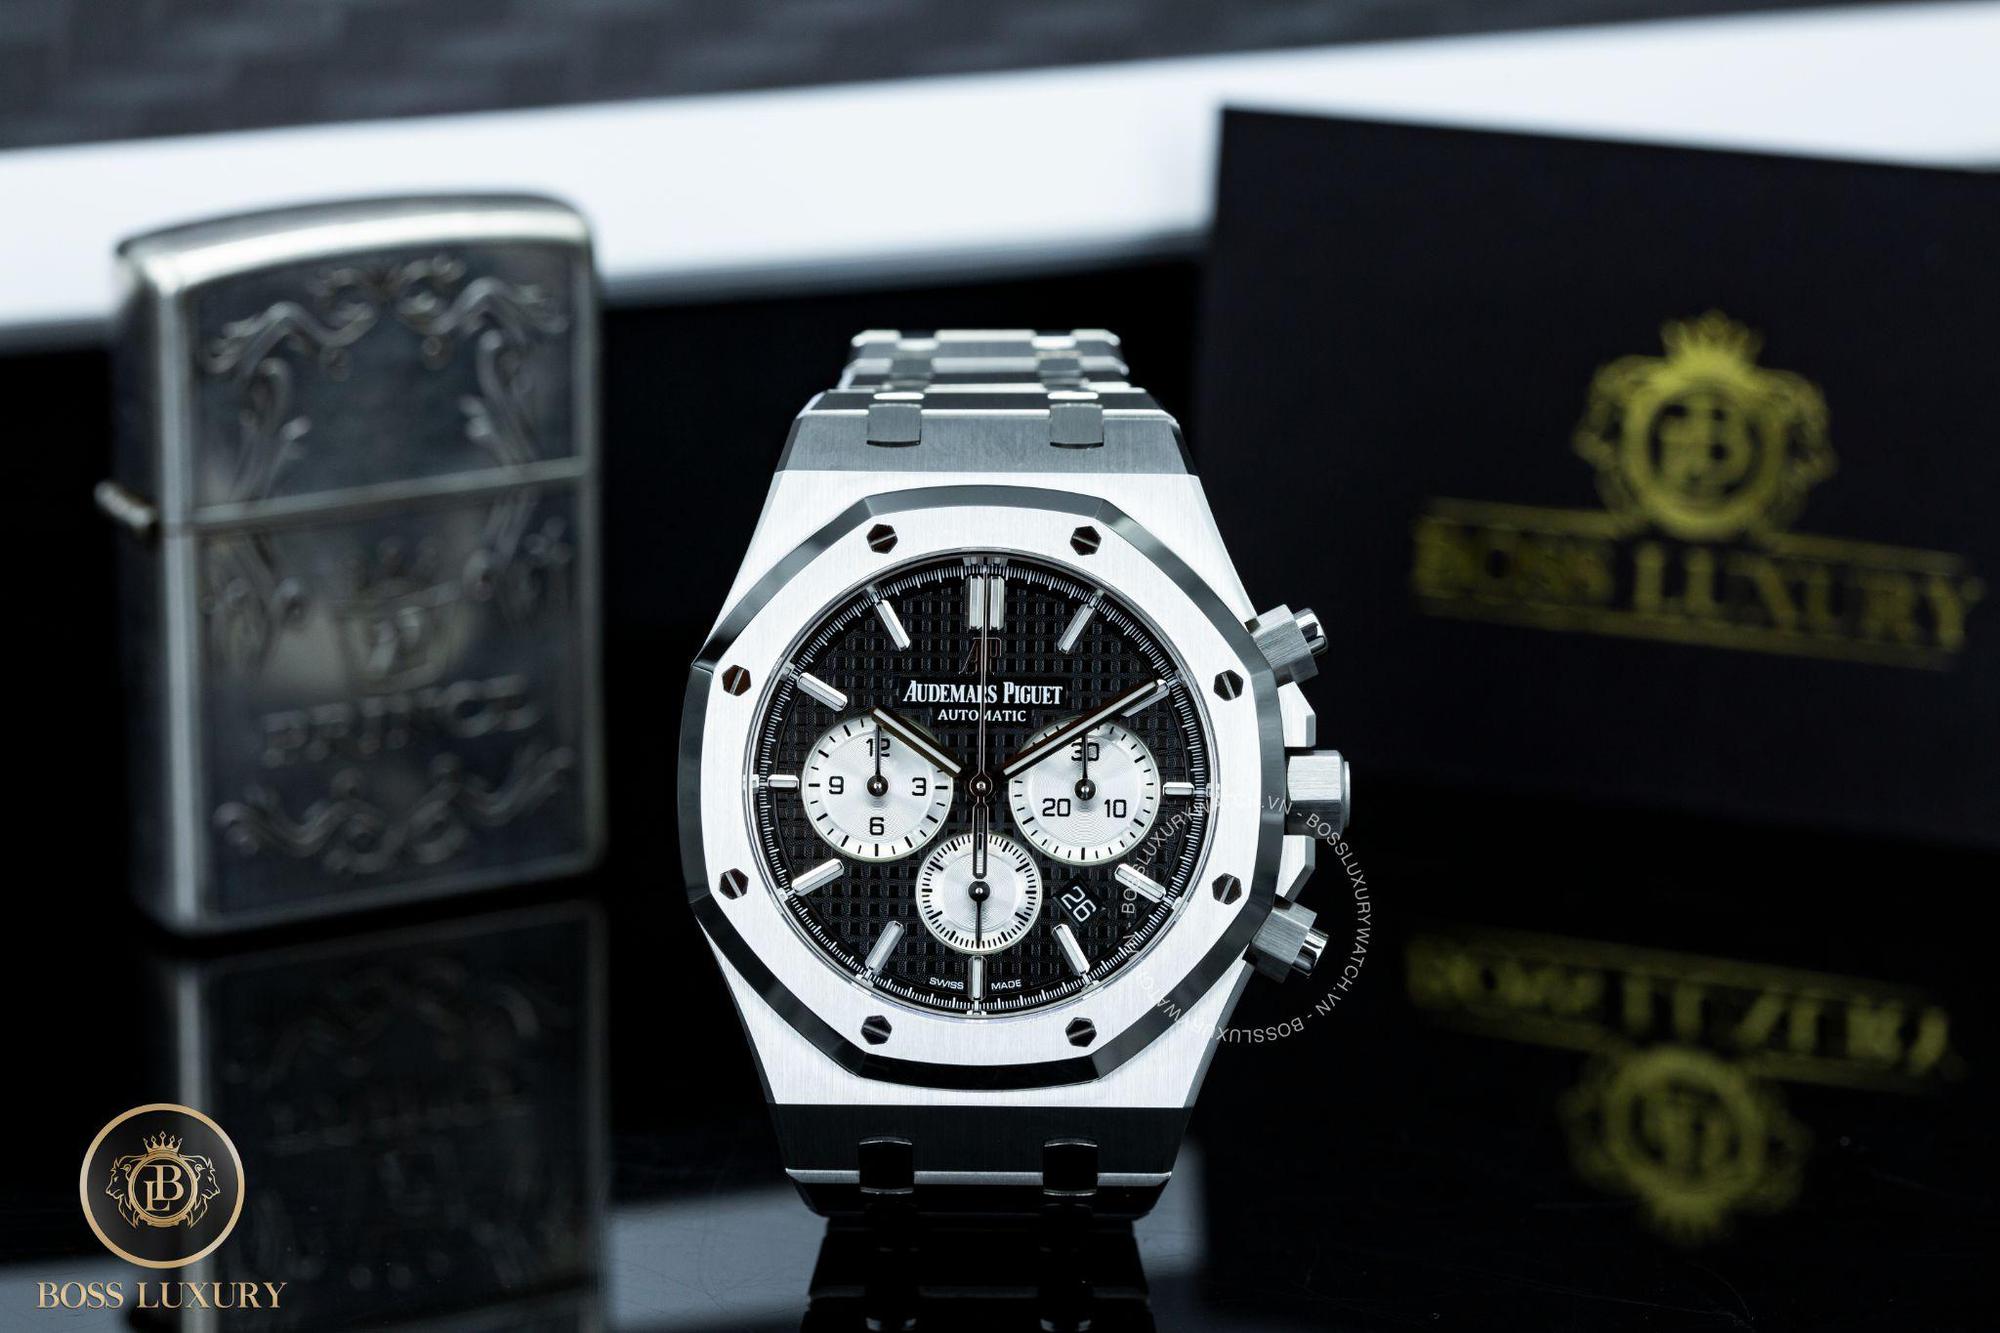 The Audemars Piguet Royal Oak watches that gentlemen must definitely add to the Boss Luxury collection - Photo 3.